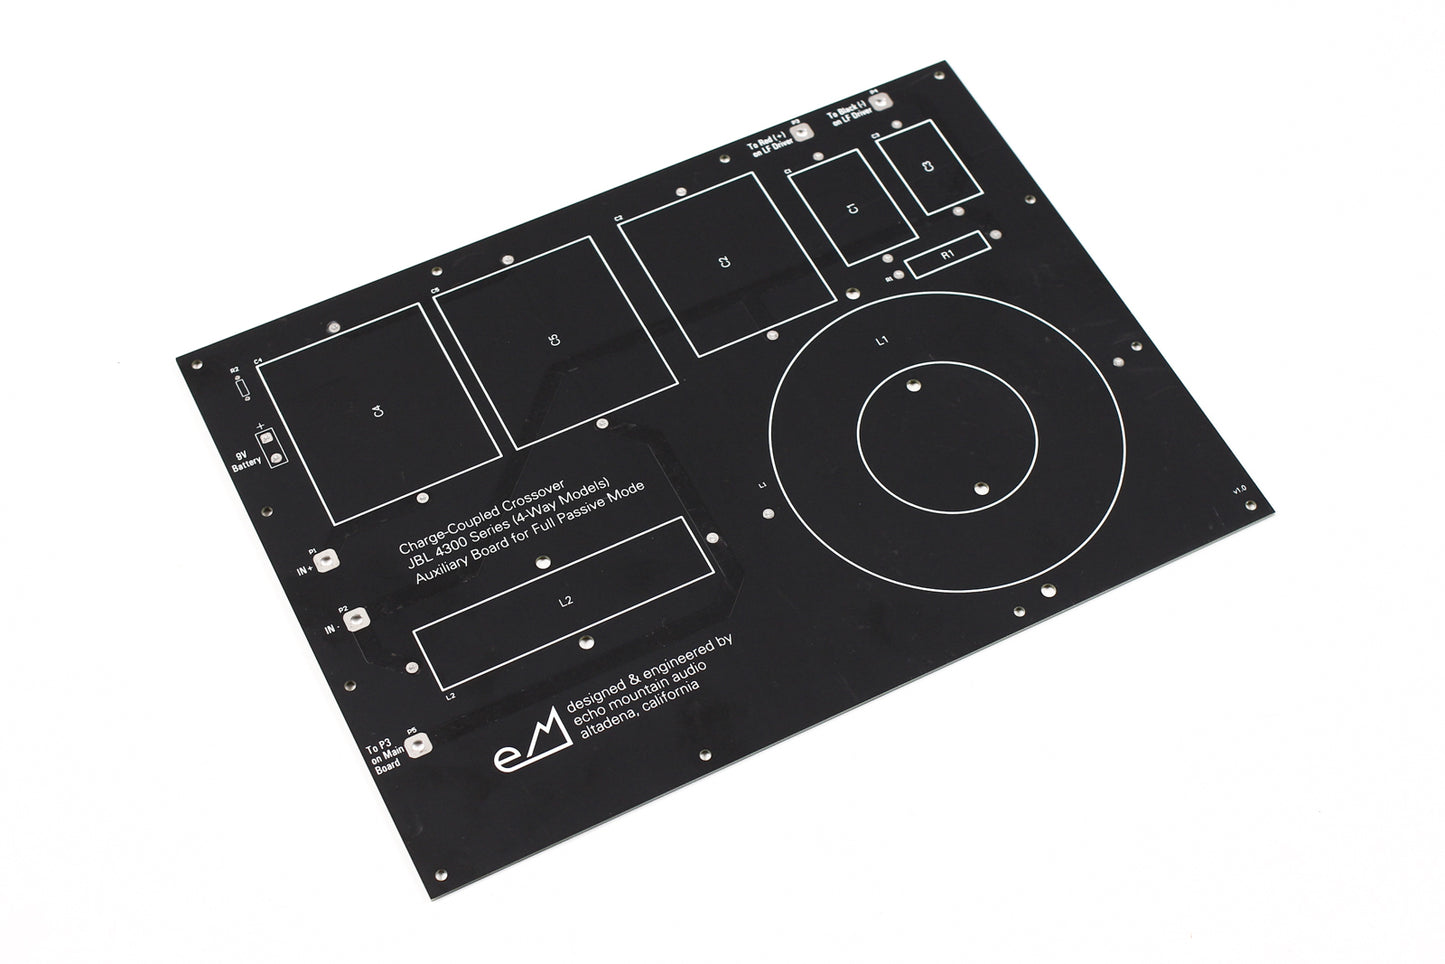 Auxiliary Boards for JBL 4300 Series 4-way Models